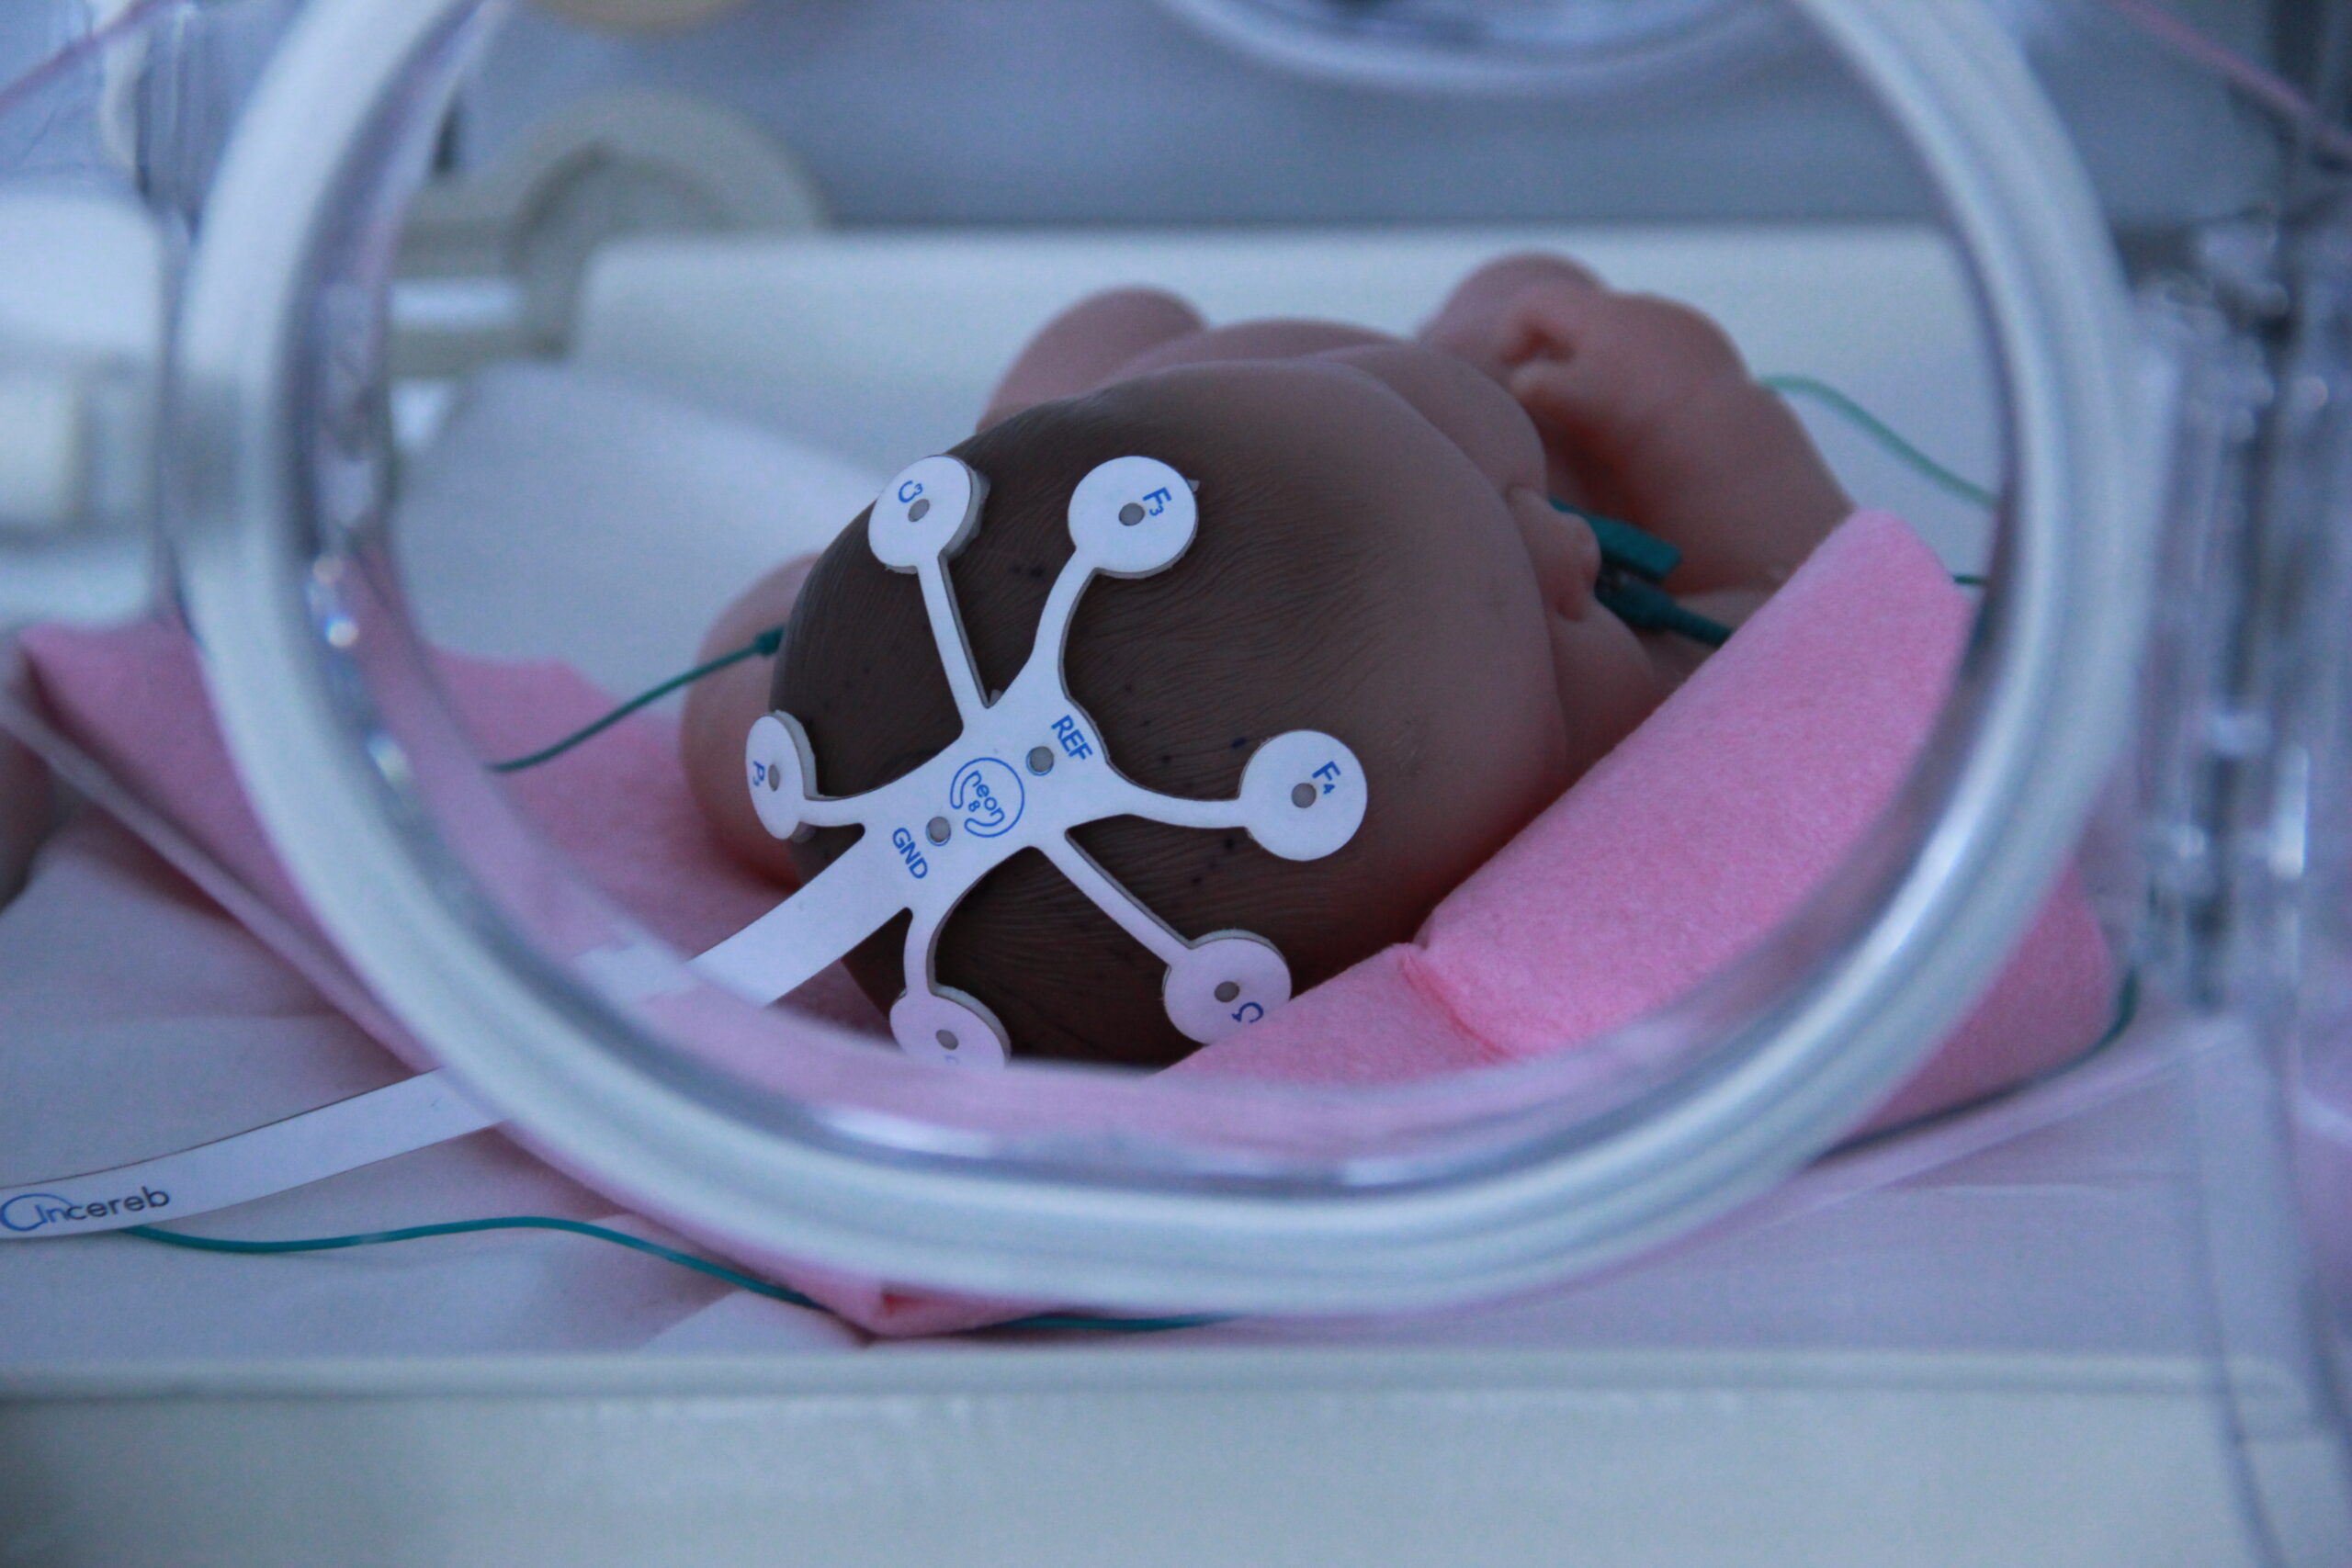 A high-quality label on a baby's head in an incubator.